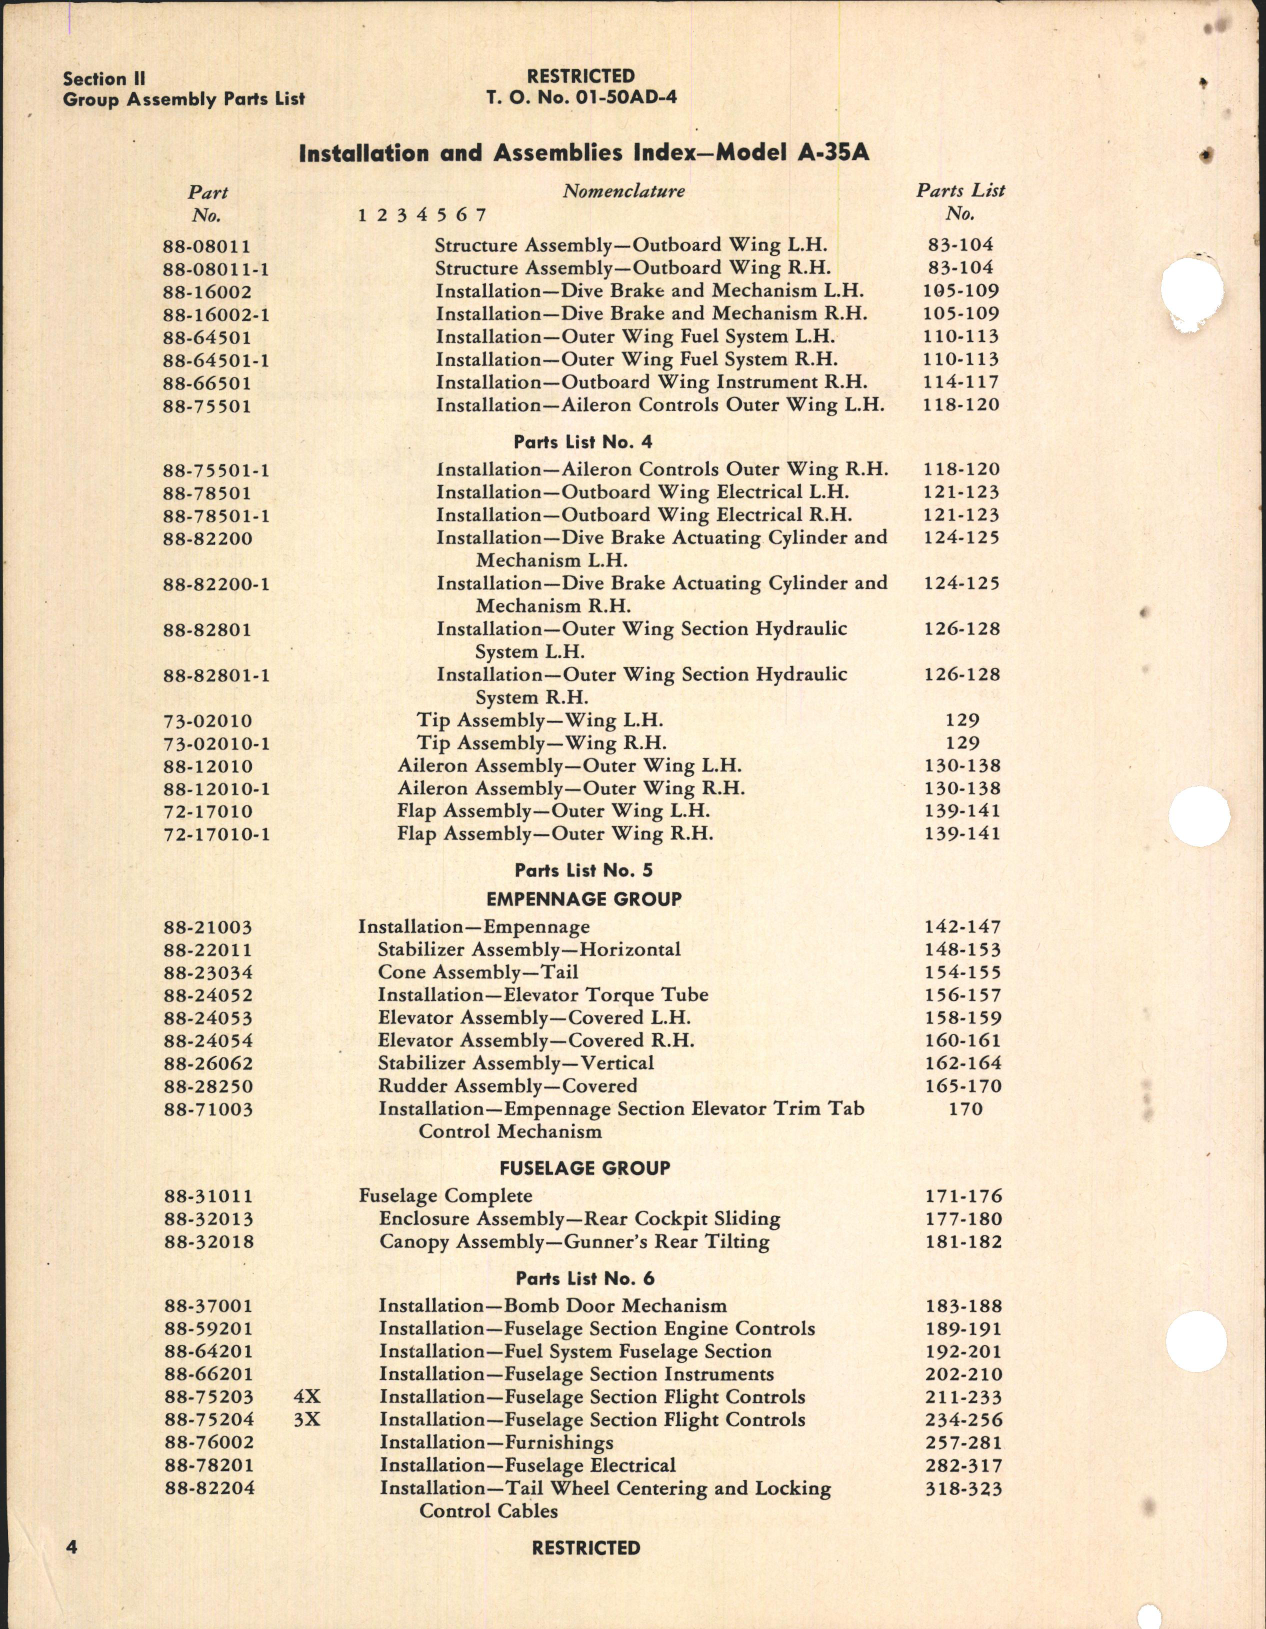 Sample page 6 from AirCorps Library document: Parts Catalog for A-35A Airplanes